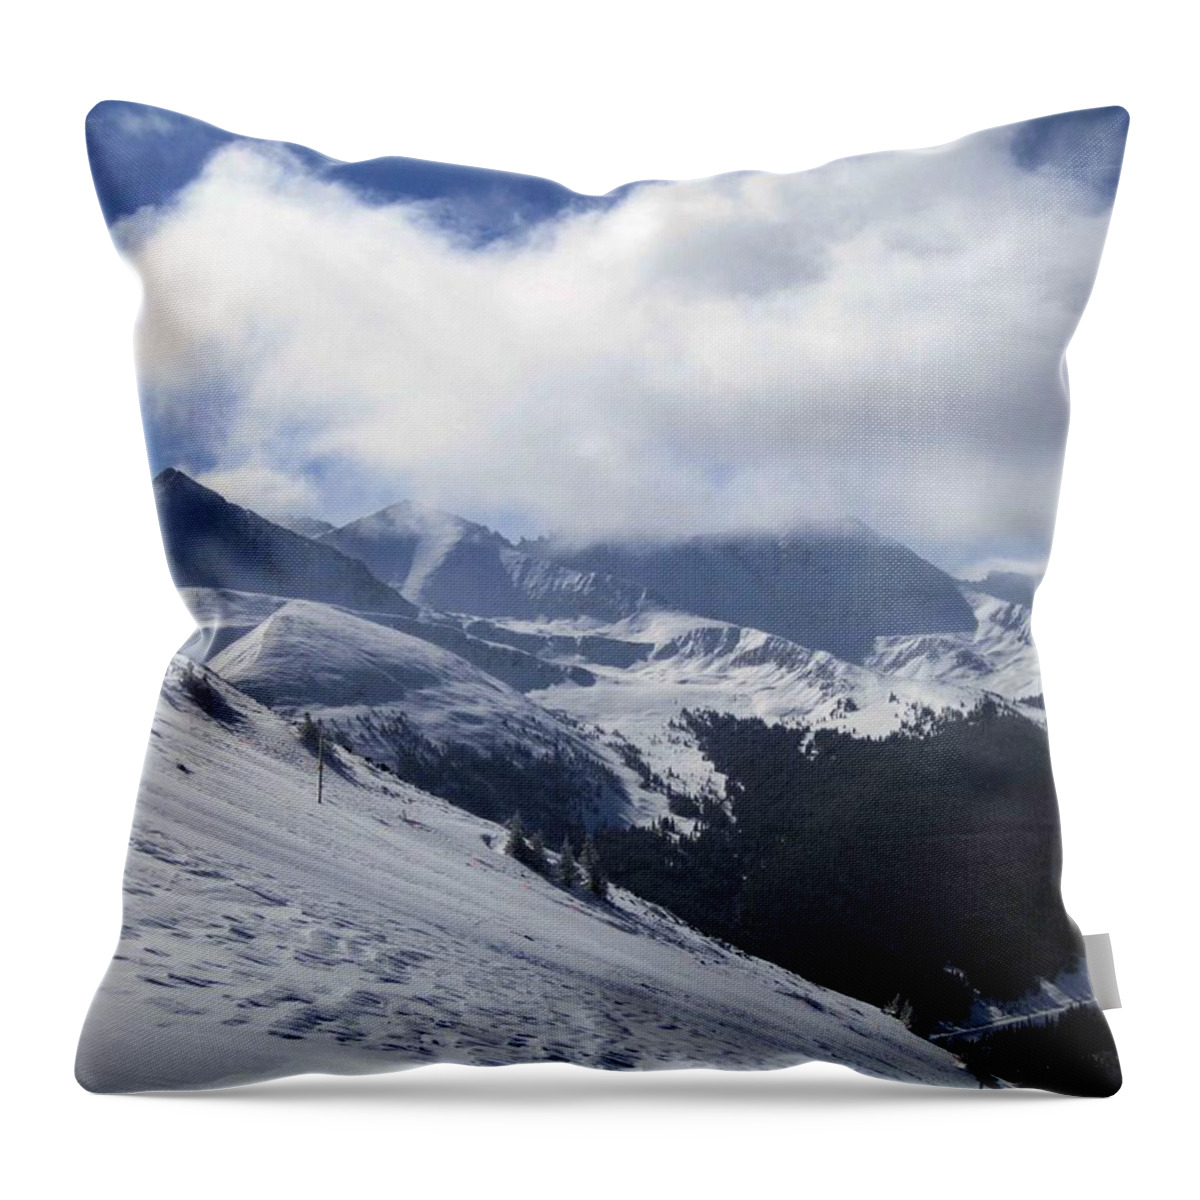 Skiing Art Throw Pillow featuring the photograph Skiing With A View by Fiona Kennard